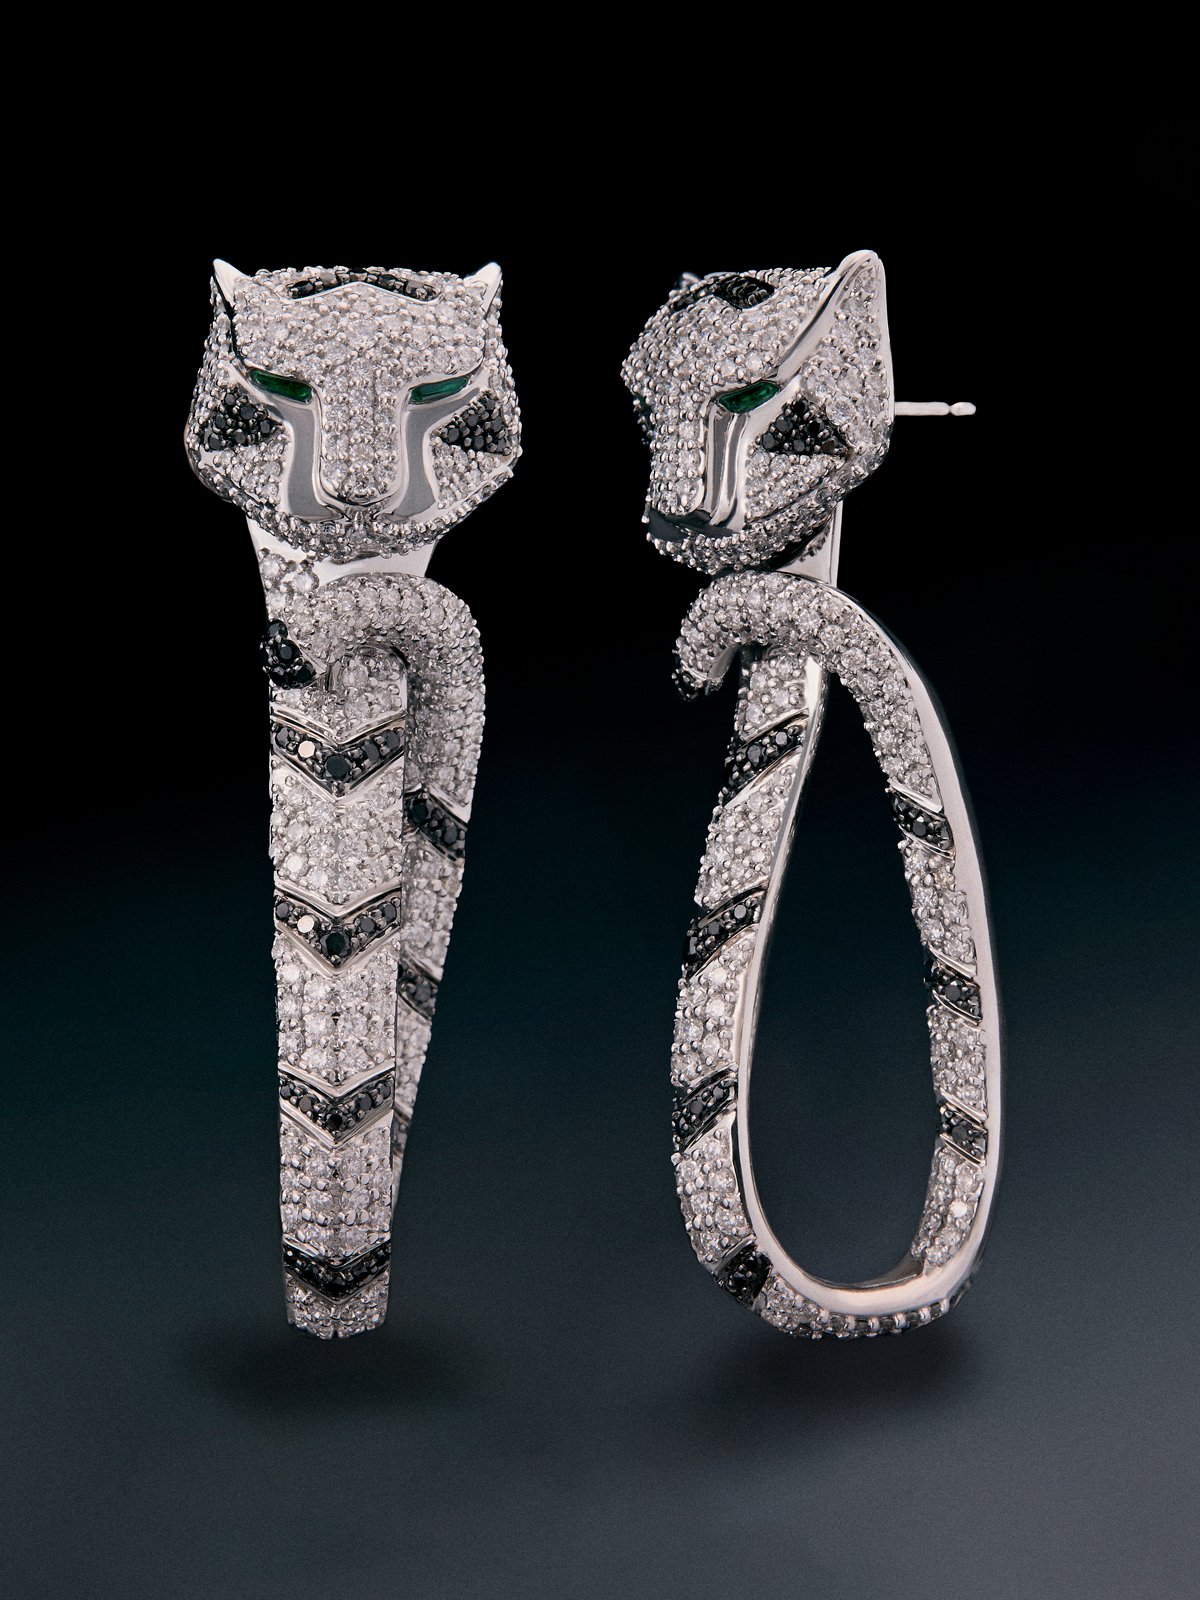 Detachable earrings in 18K white gold with 2.68 ct brilliant-cut white diamonds and 0.47 ct black diamonds, and 0.26 ct trapezoid-cut emeralds in the shape of a tiger